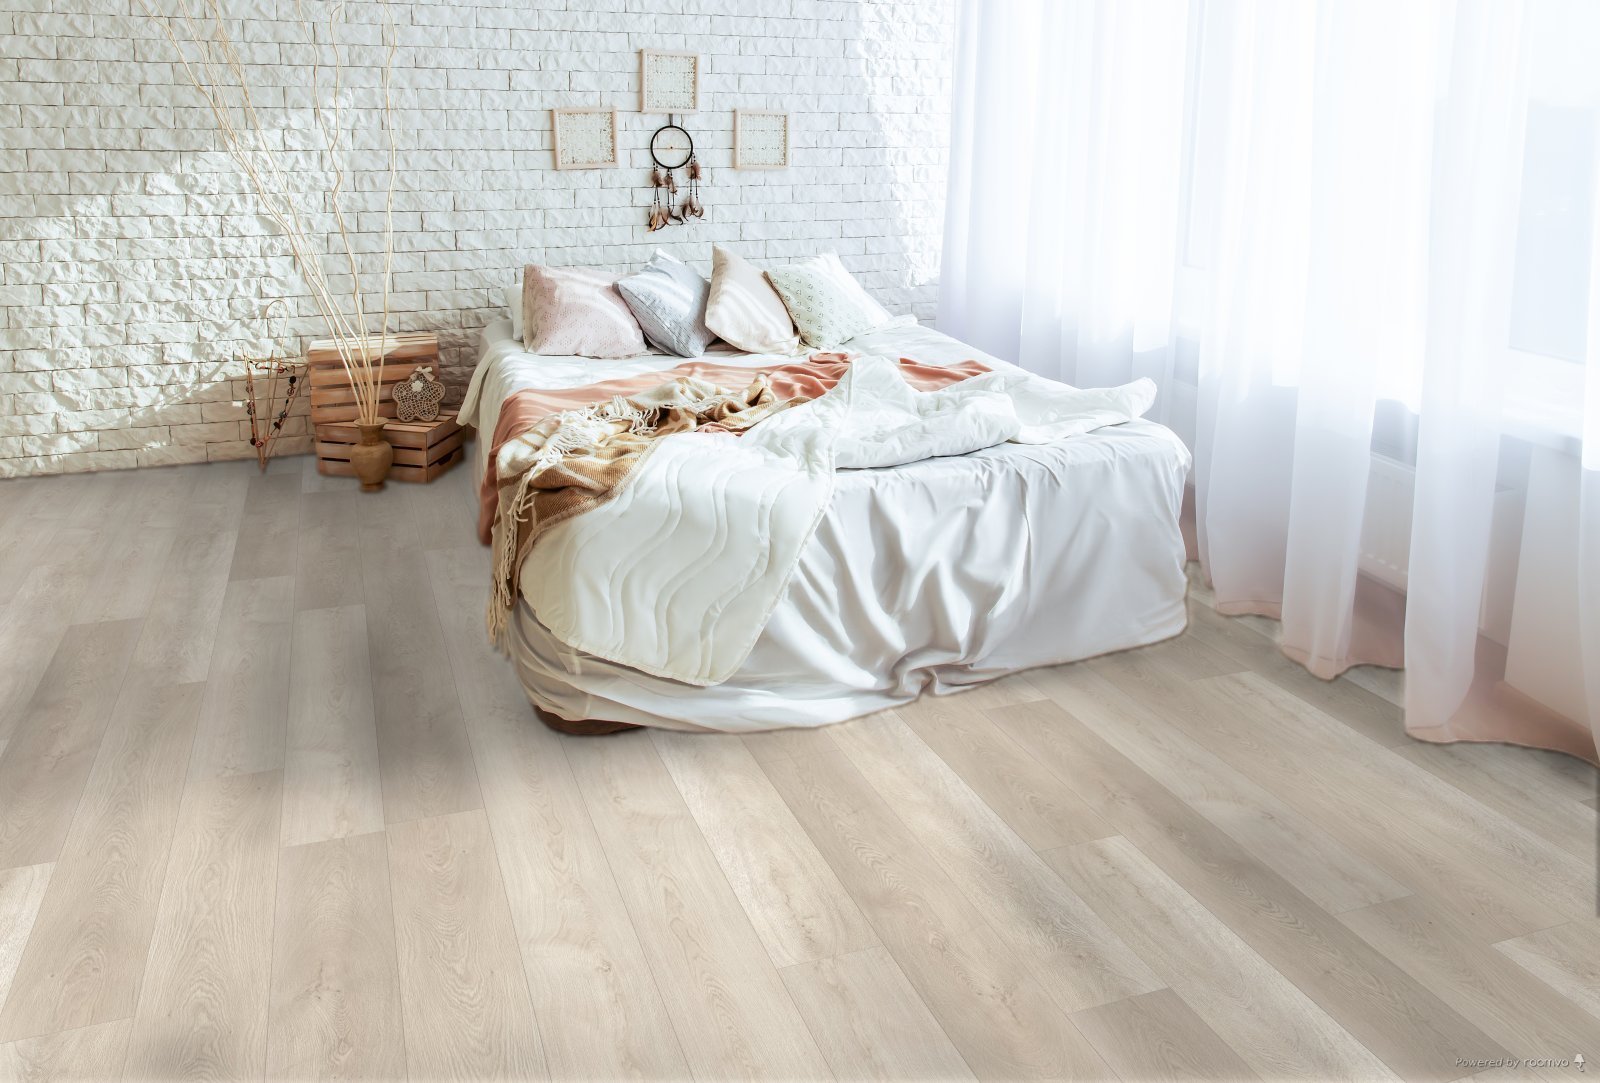 Horizen Flooring presents to you a picture of a quality wide plank Wagner luxury vinyl plank. NovoCore Q XXL Tango collection features a wide range of colors & designs that will compliment any interior. Natural wood grain synchronized surface allow for an authentic hardwood look & feel. This collection features a 0.3″ / 7.5 mm overall thickness and a durable 22 mil / 0.55 mm wear layer for residential and commercial applications.